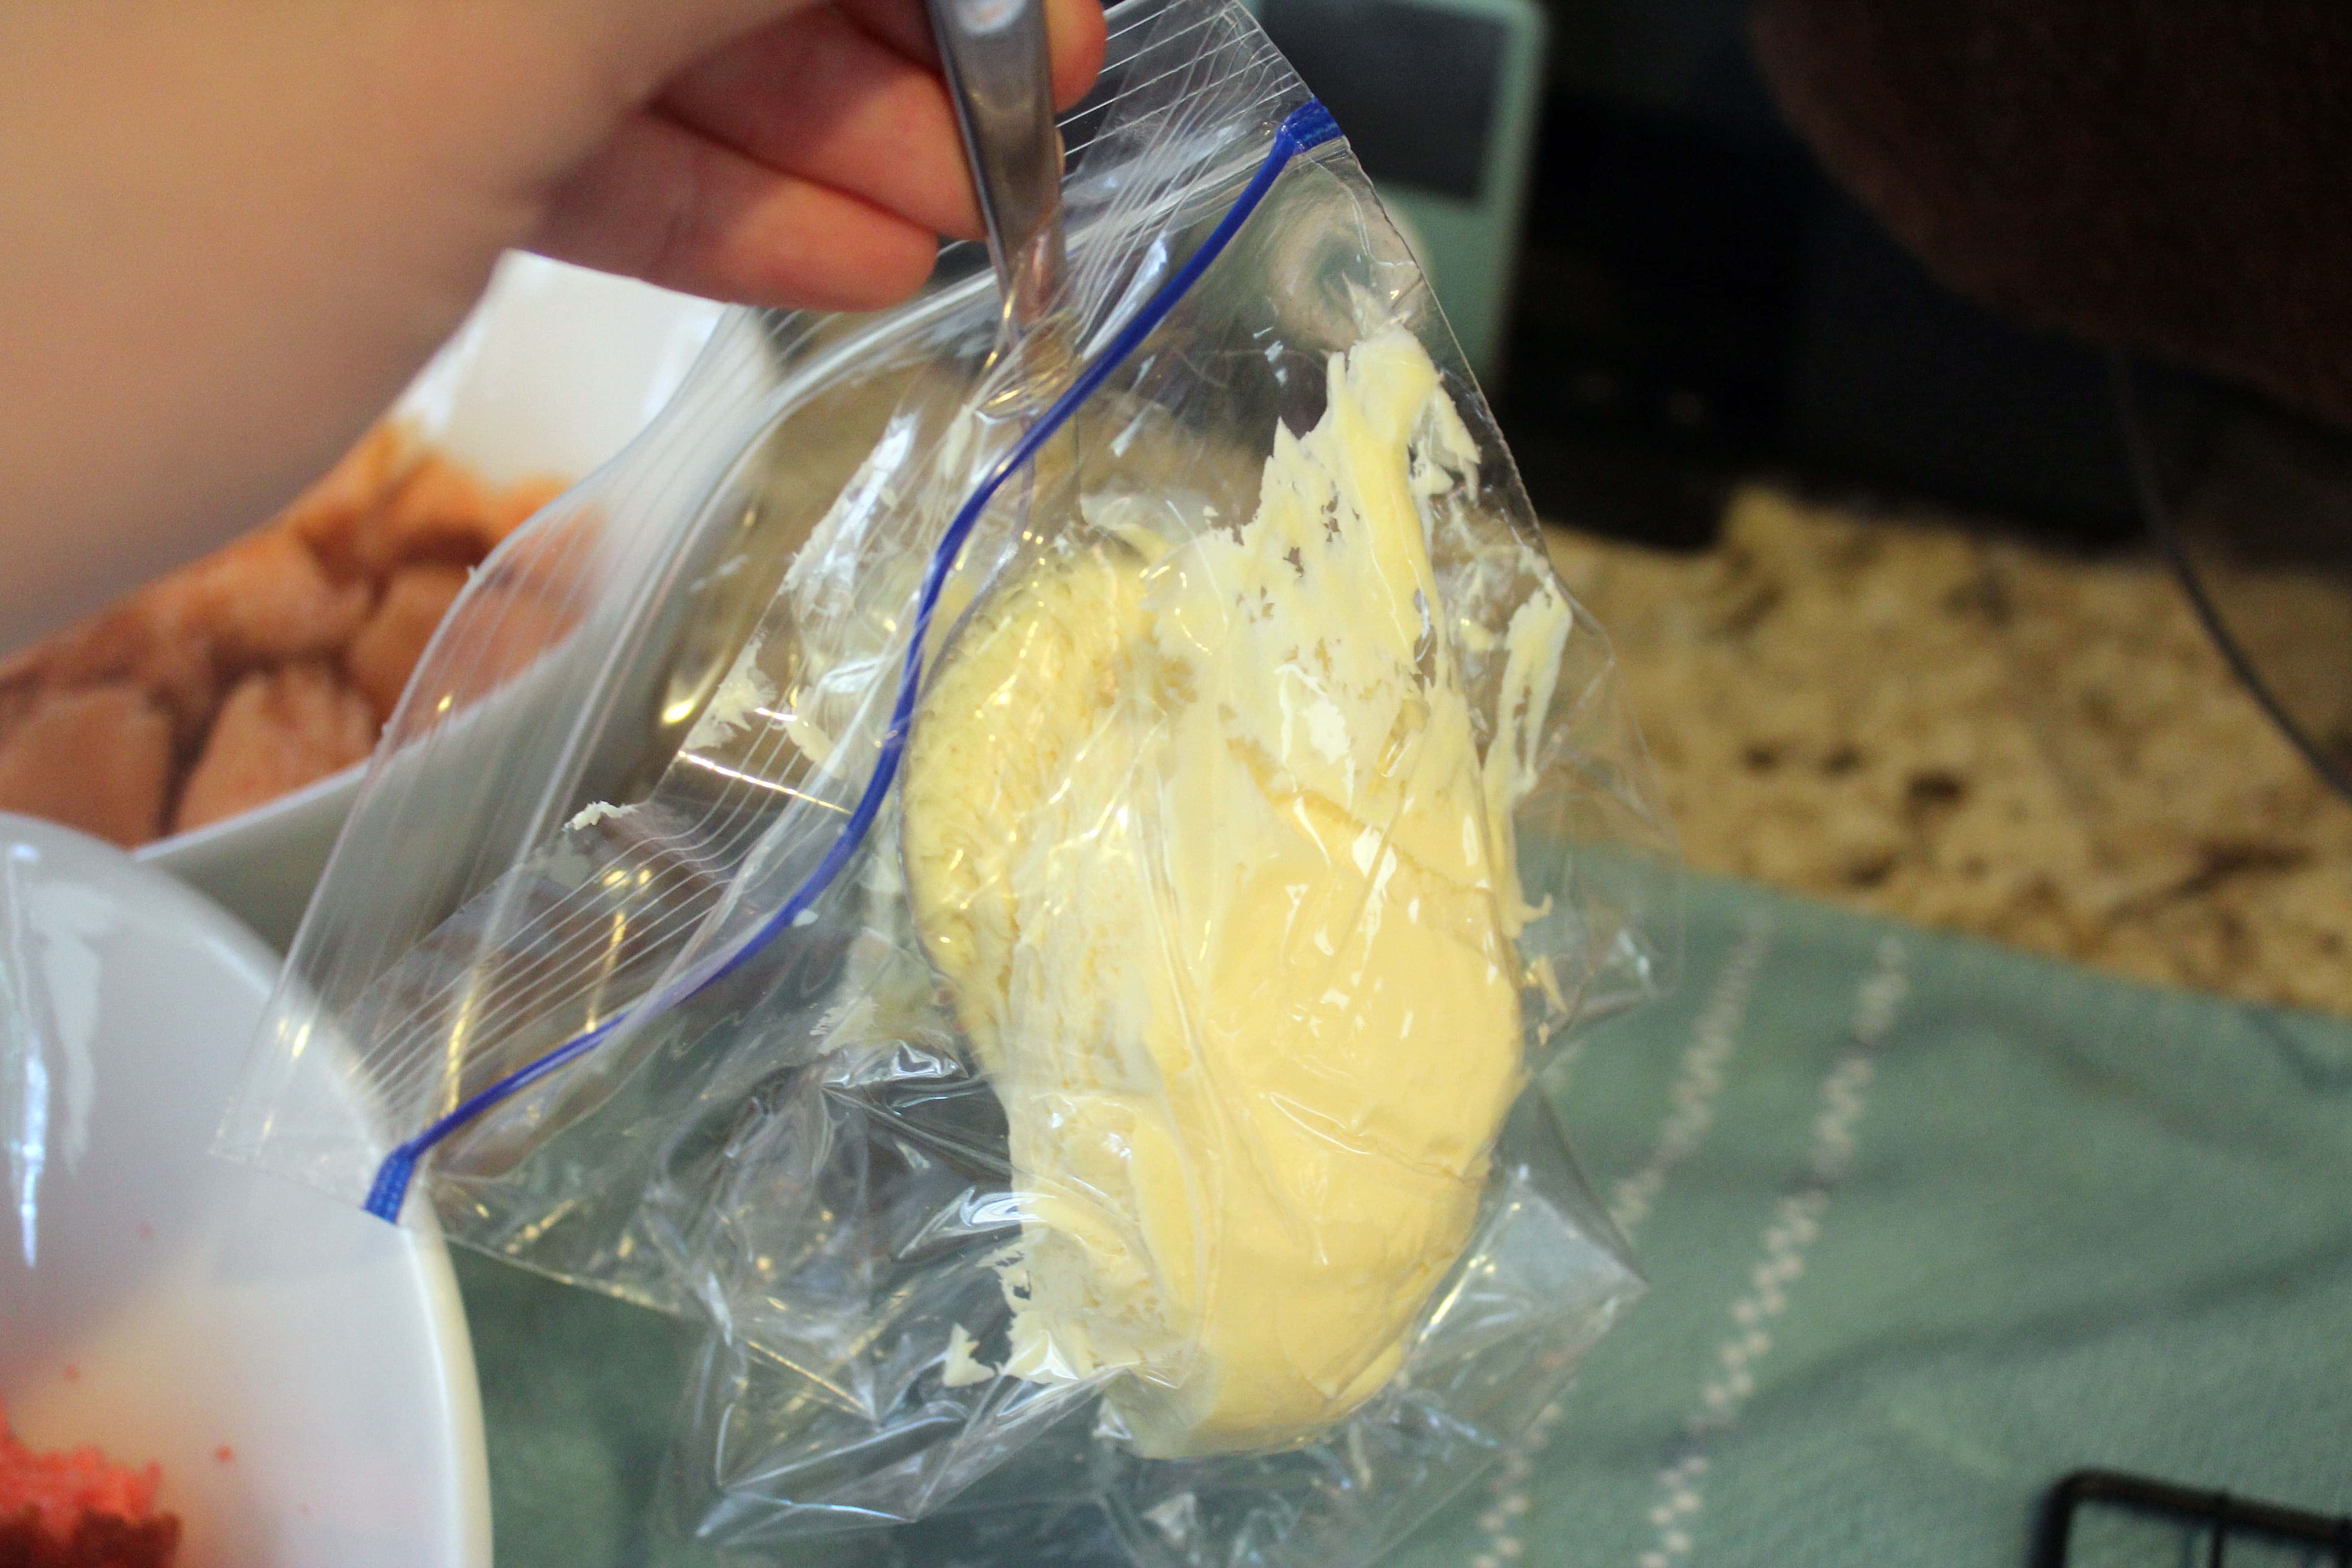 Add icing to bag